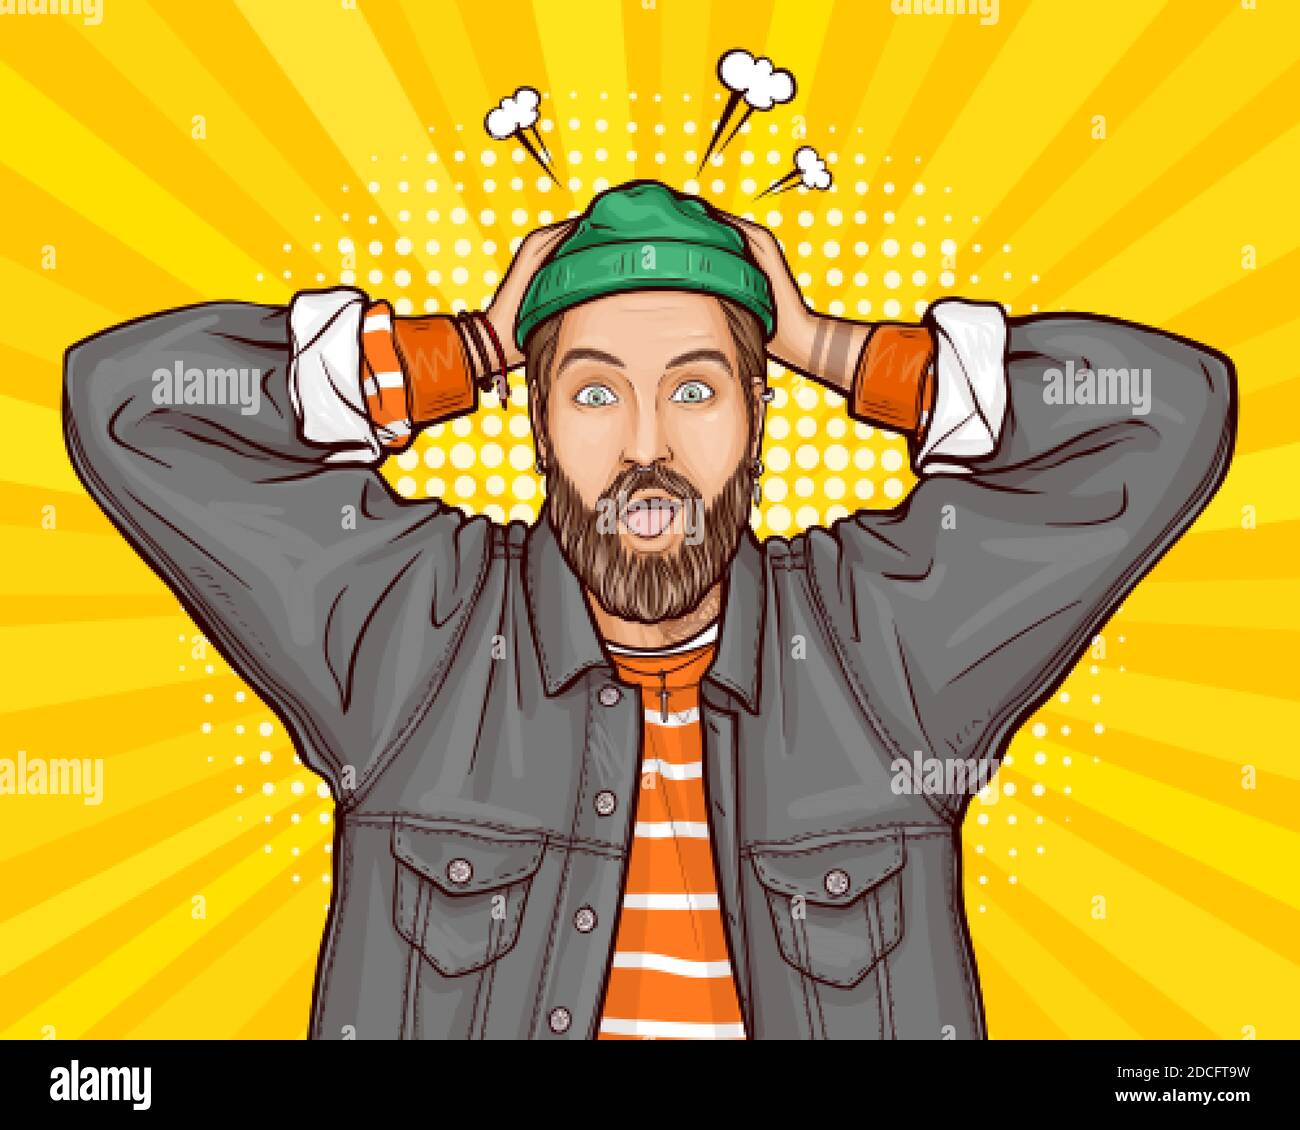 Pop art vector illustration of hipster man with wow surprised face